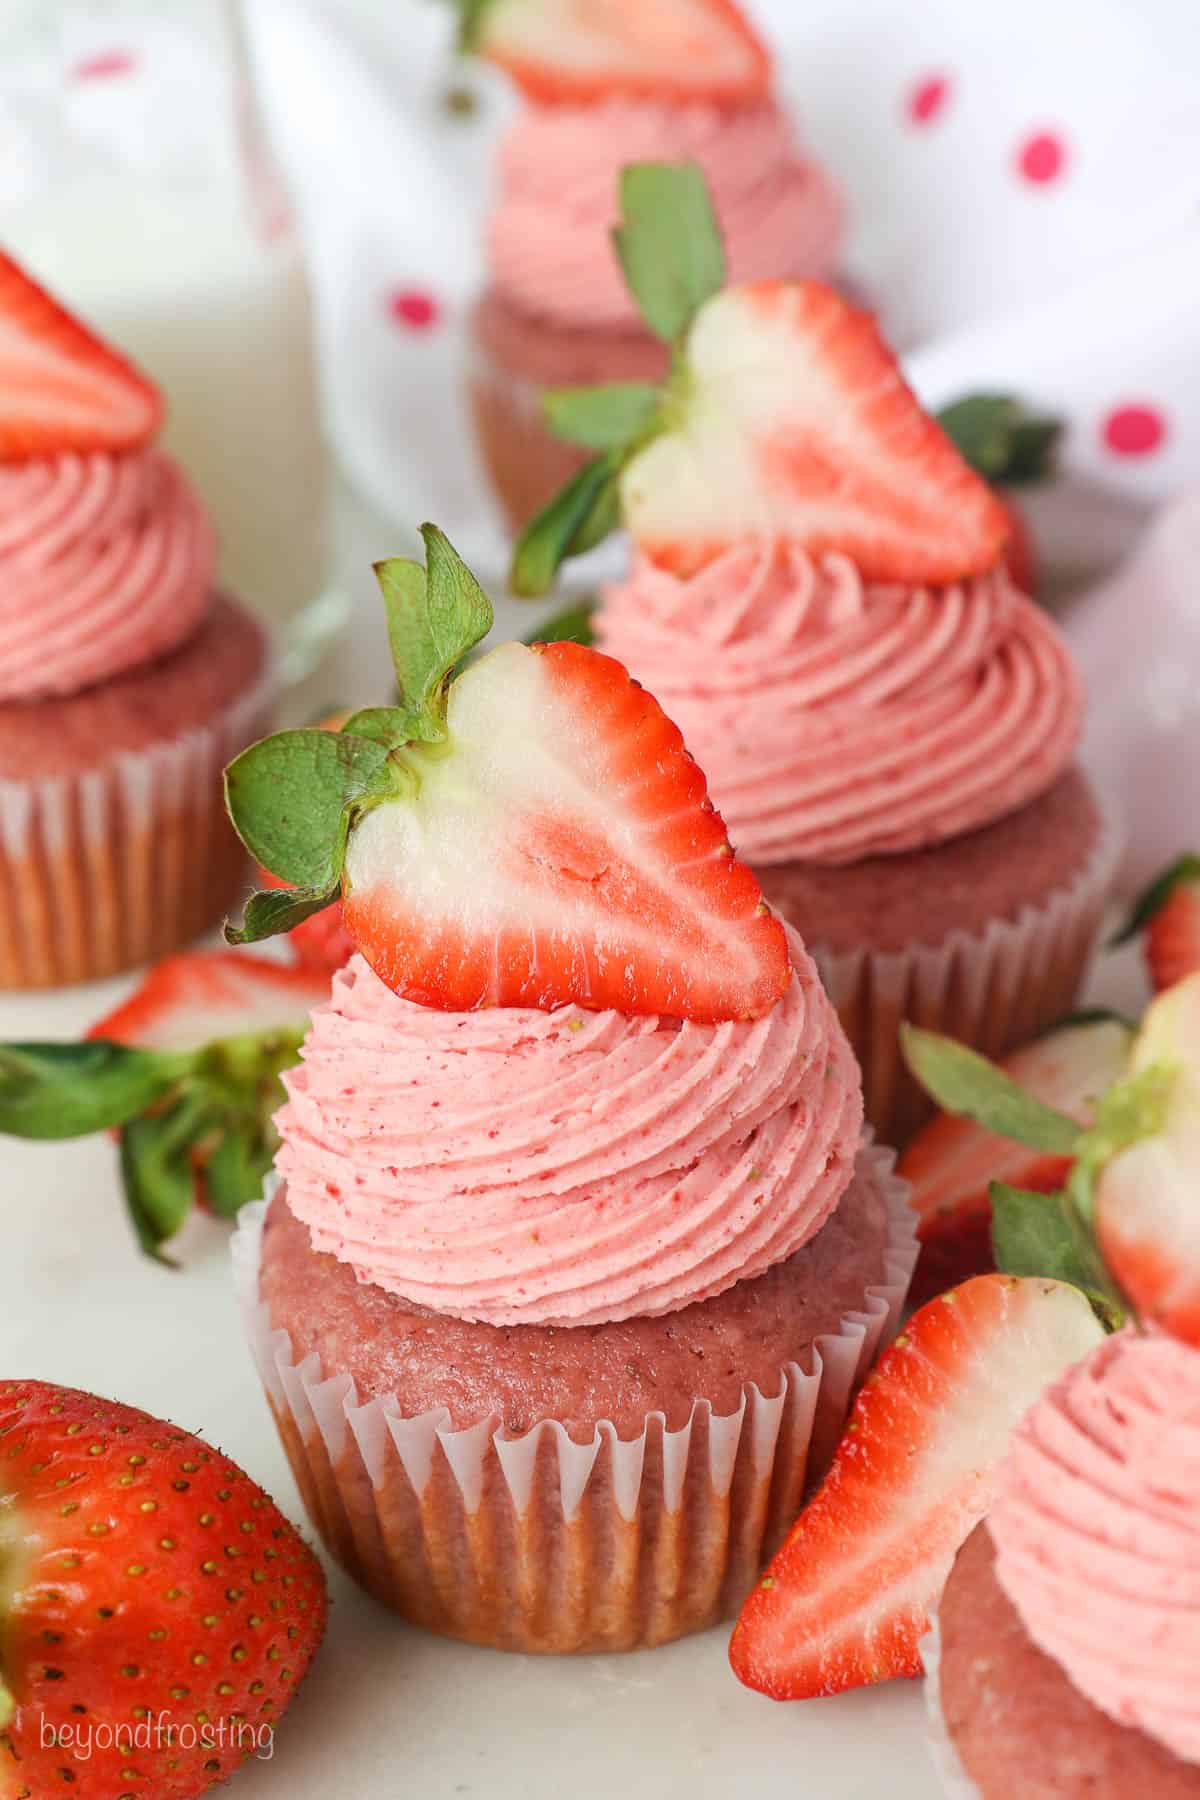 Assorted strawberry cupcakes with swirls of strawberry frosting garnished with fresh strawberries.